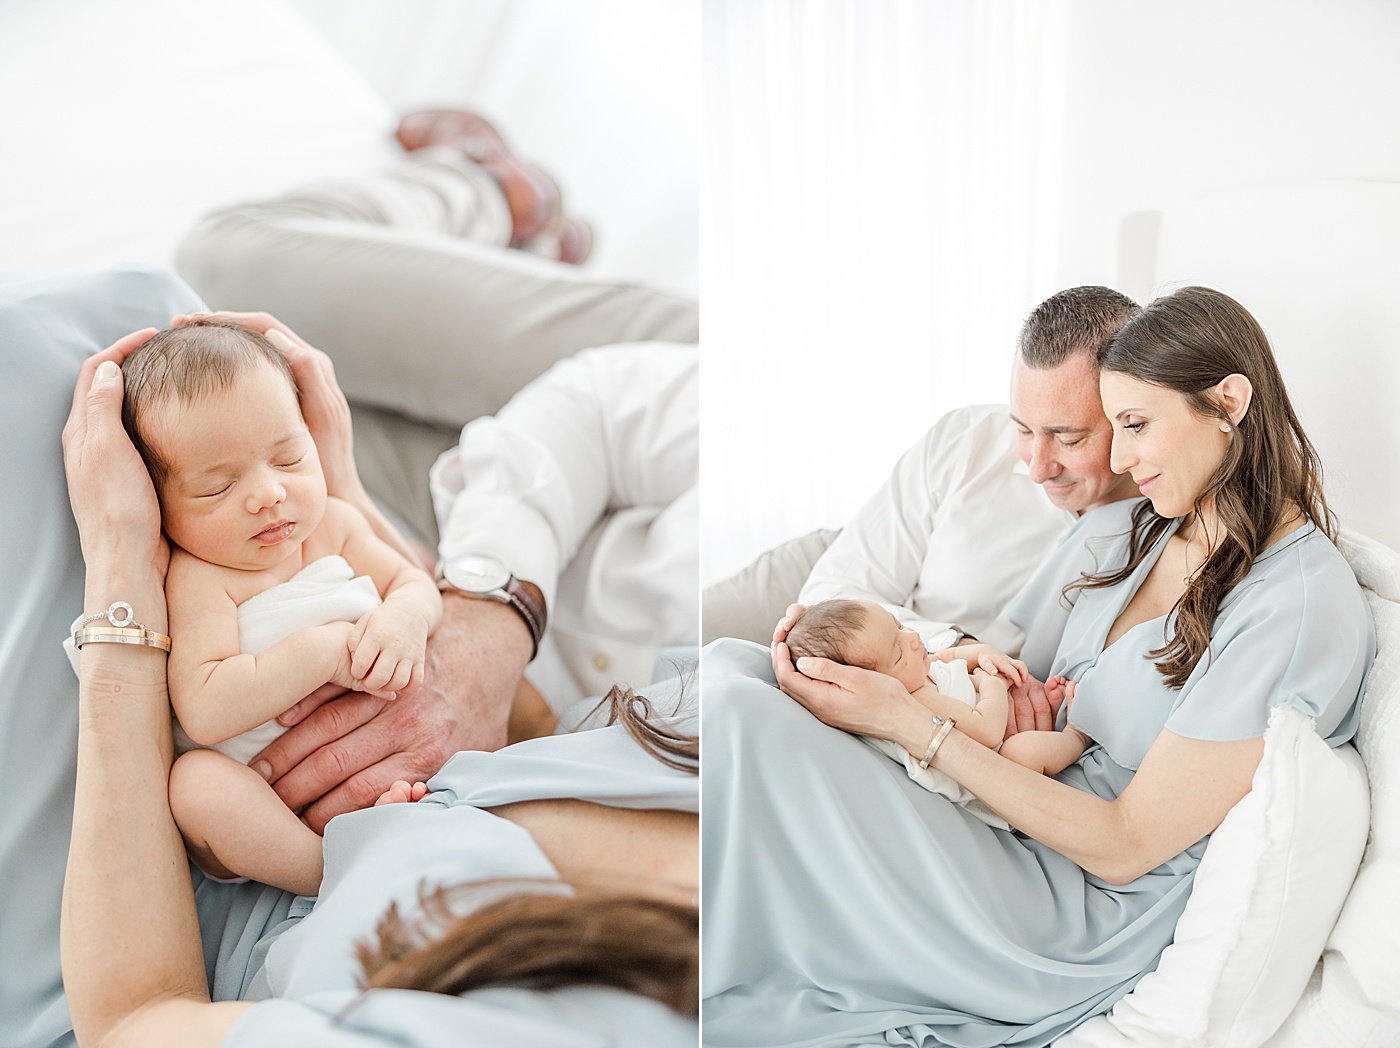 Newborn photos in studio for parents and newborn son | Kristin Wood Photography